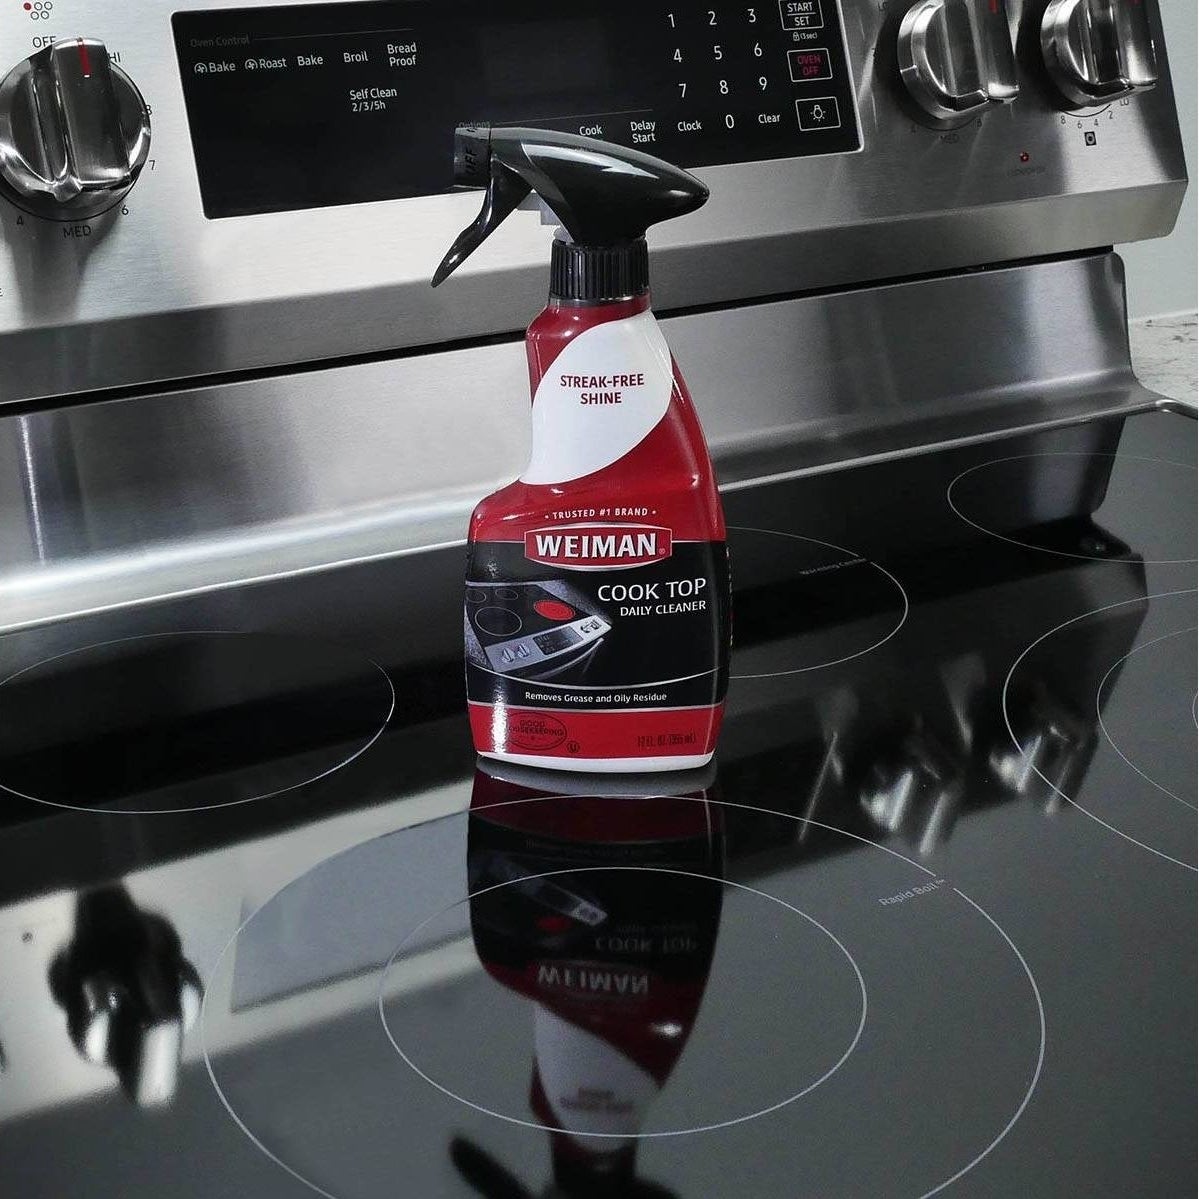 the red and black spray bottle of cleaner on a shiny glass cooktop